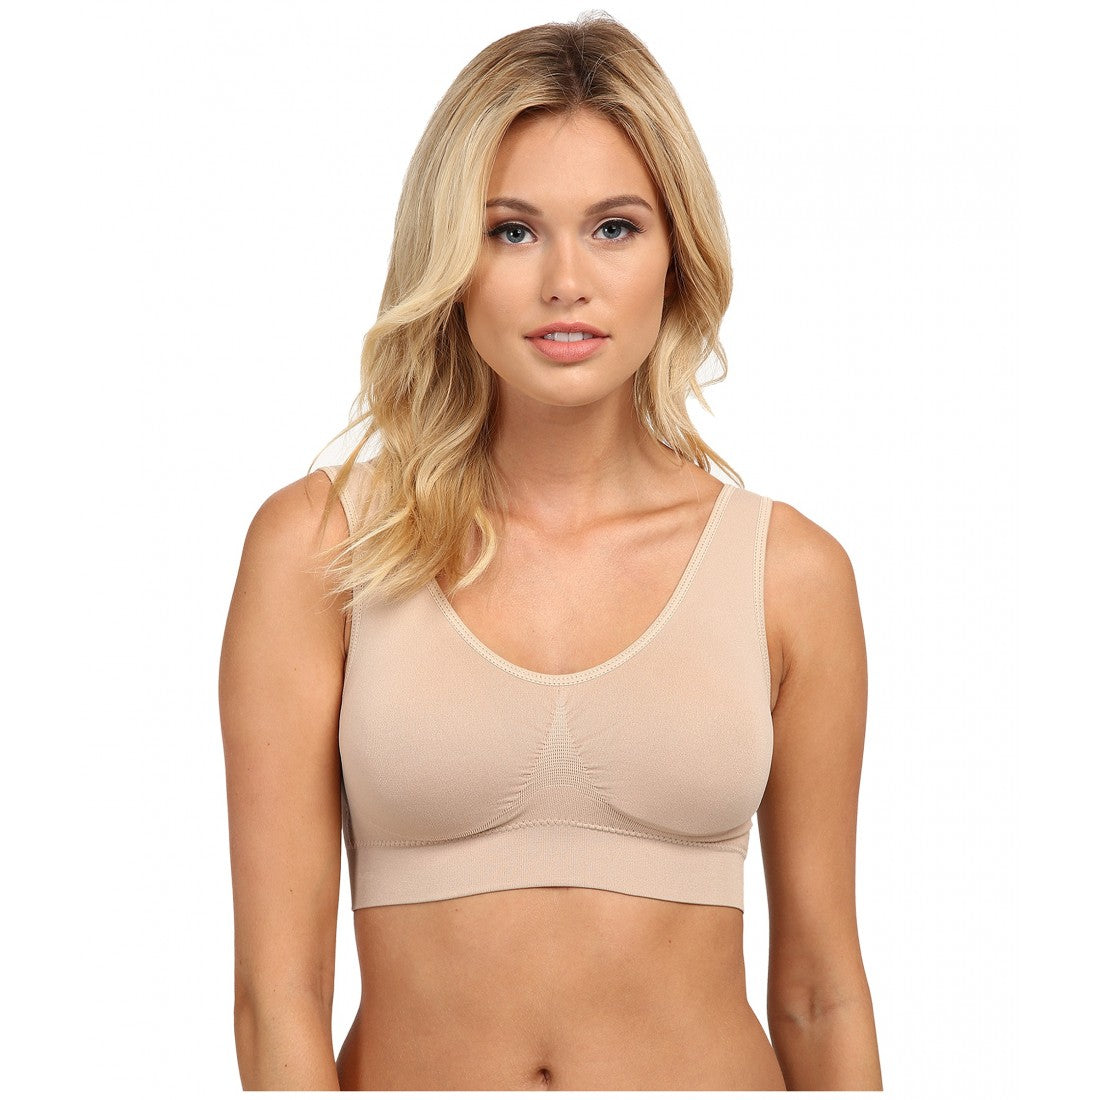 Apropos - The original Coobie bras are available at